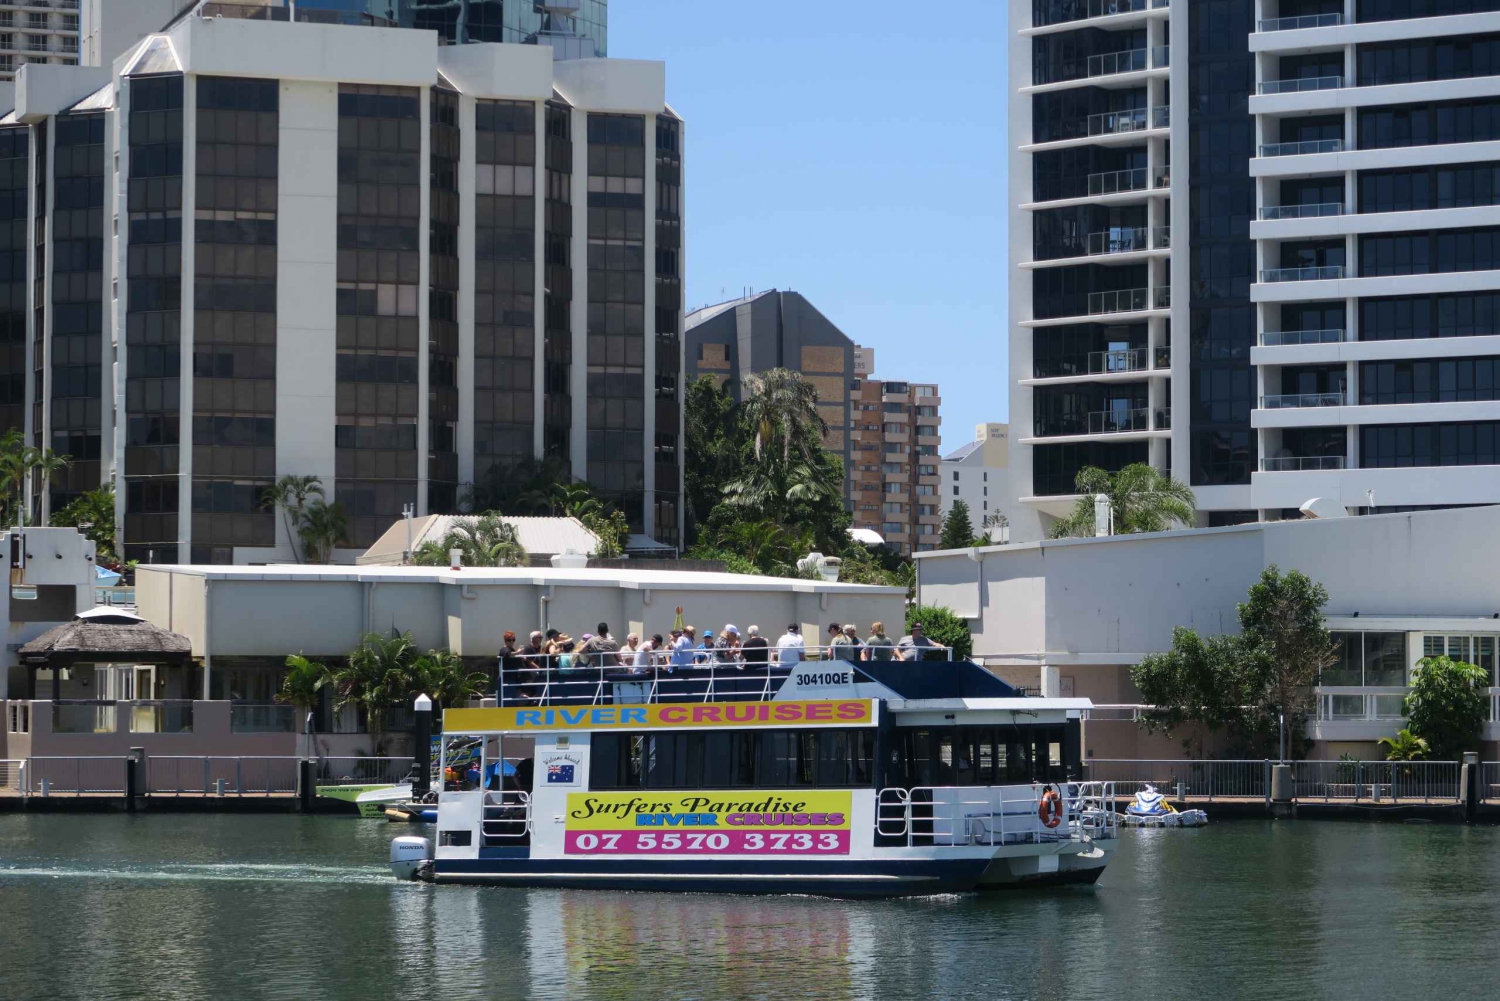 Gold Coast Morning Tea Cruise from Surfers Paradise